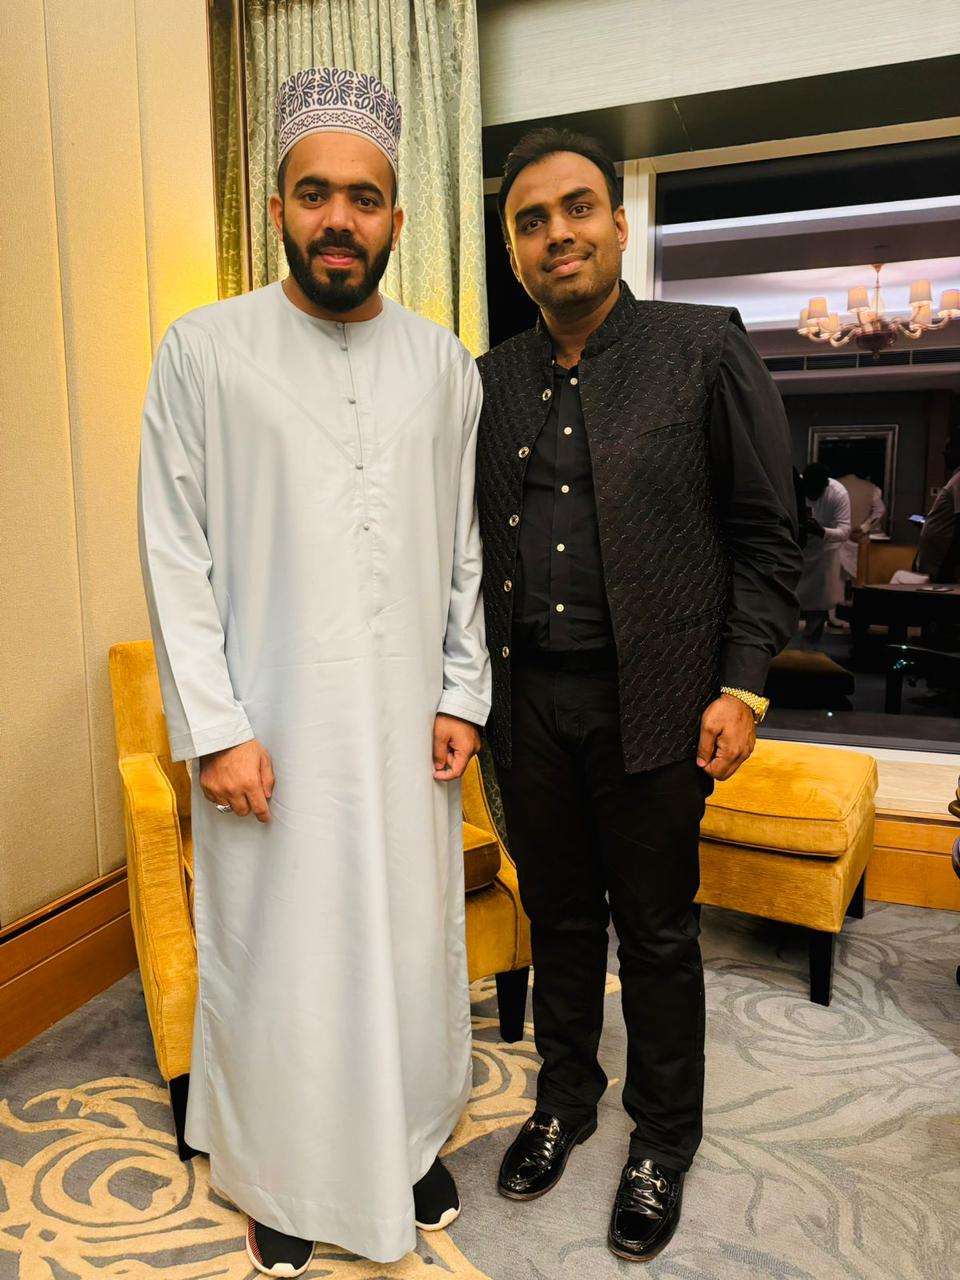 Dr. Thousif Pasha welcomed Haji Shihab Chittoor, who embarked on an inspirational journey to Mecca by foot in 12 months.